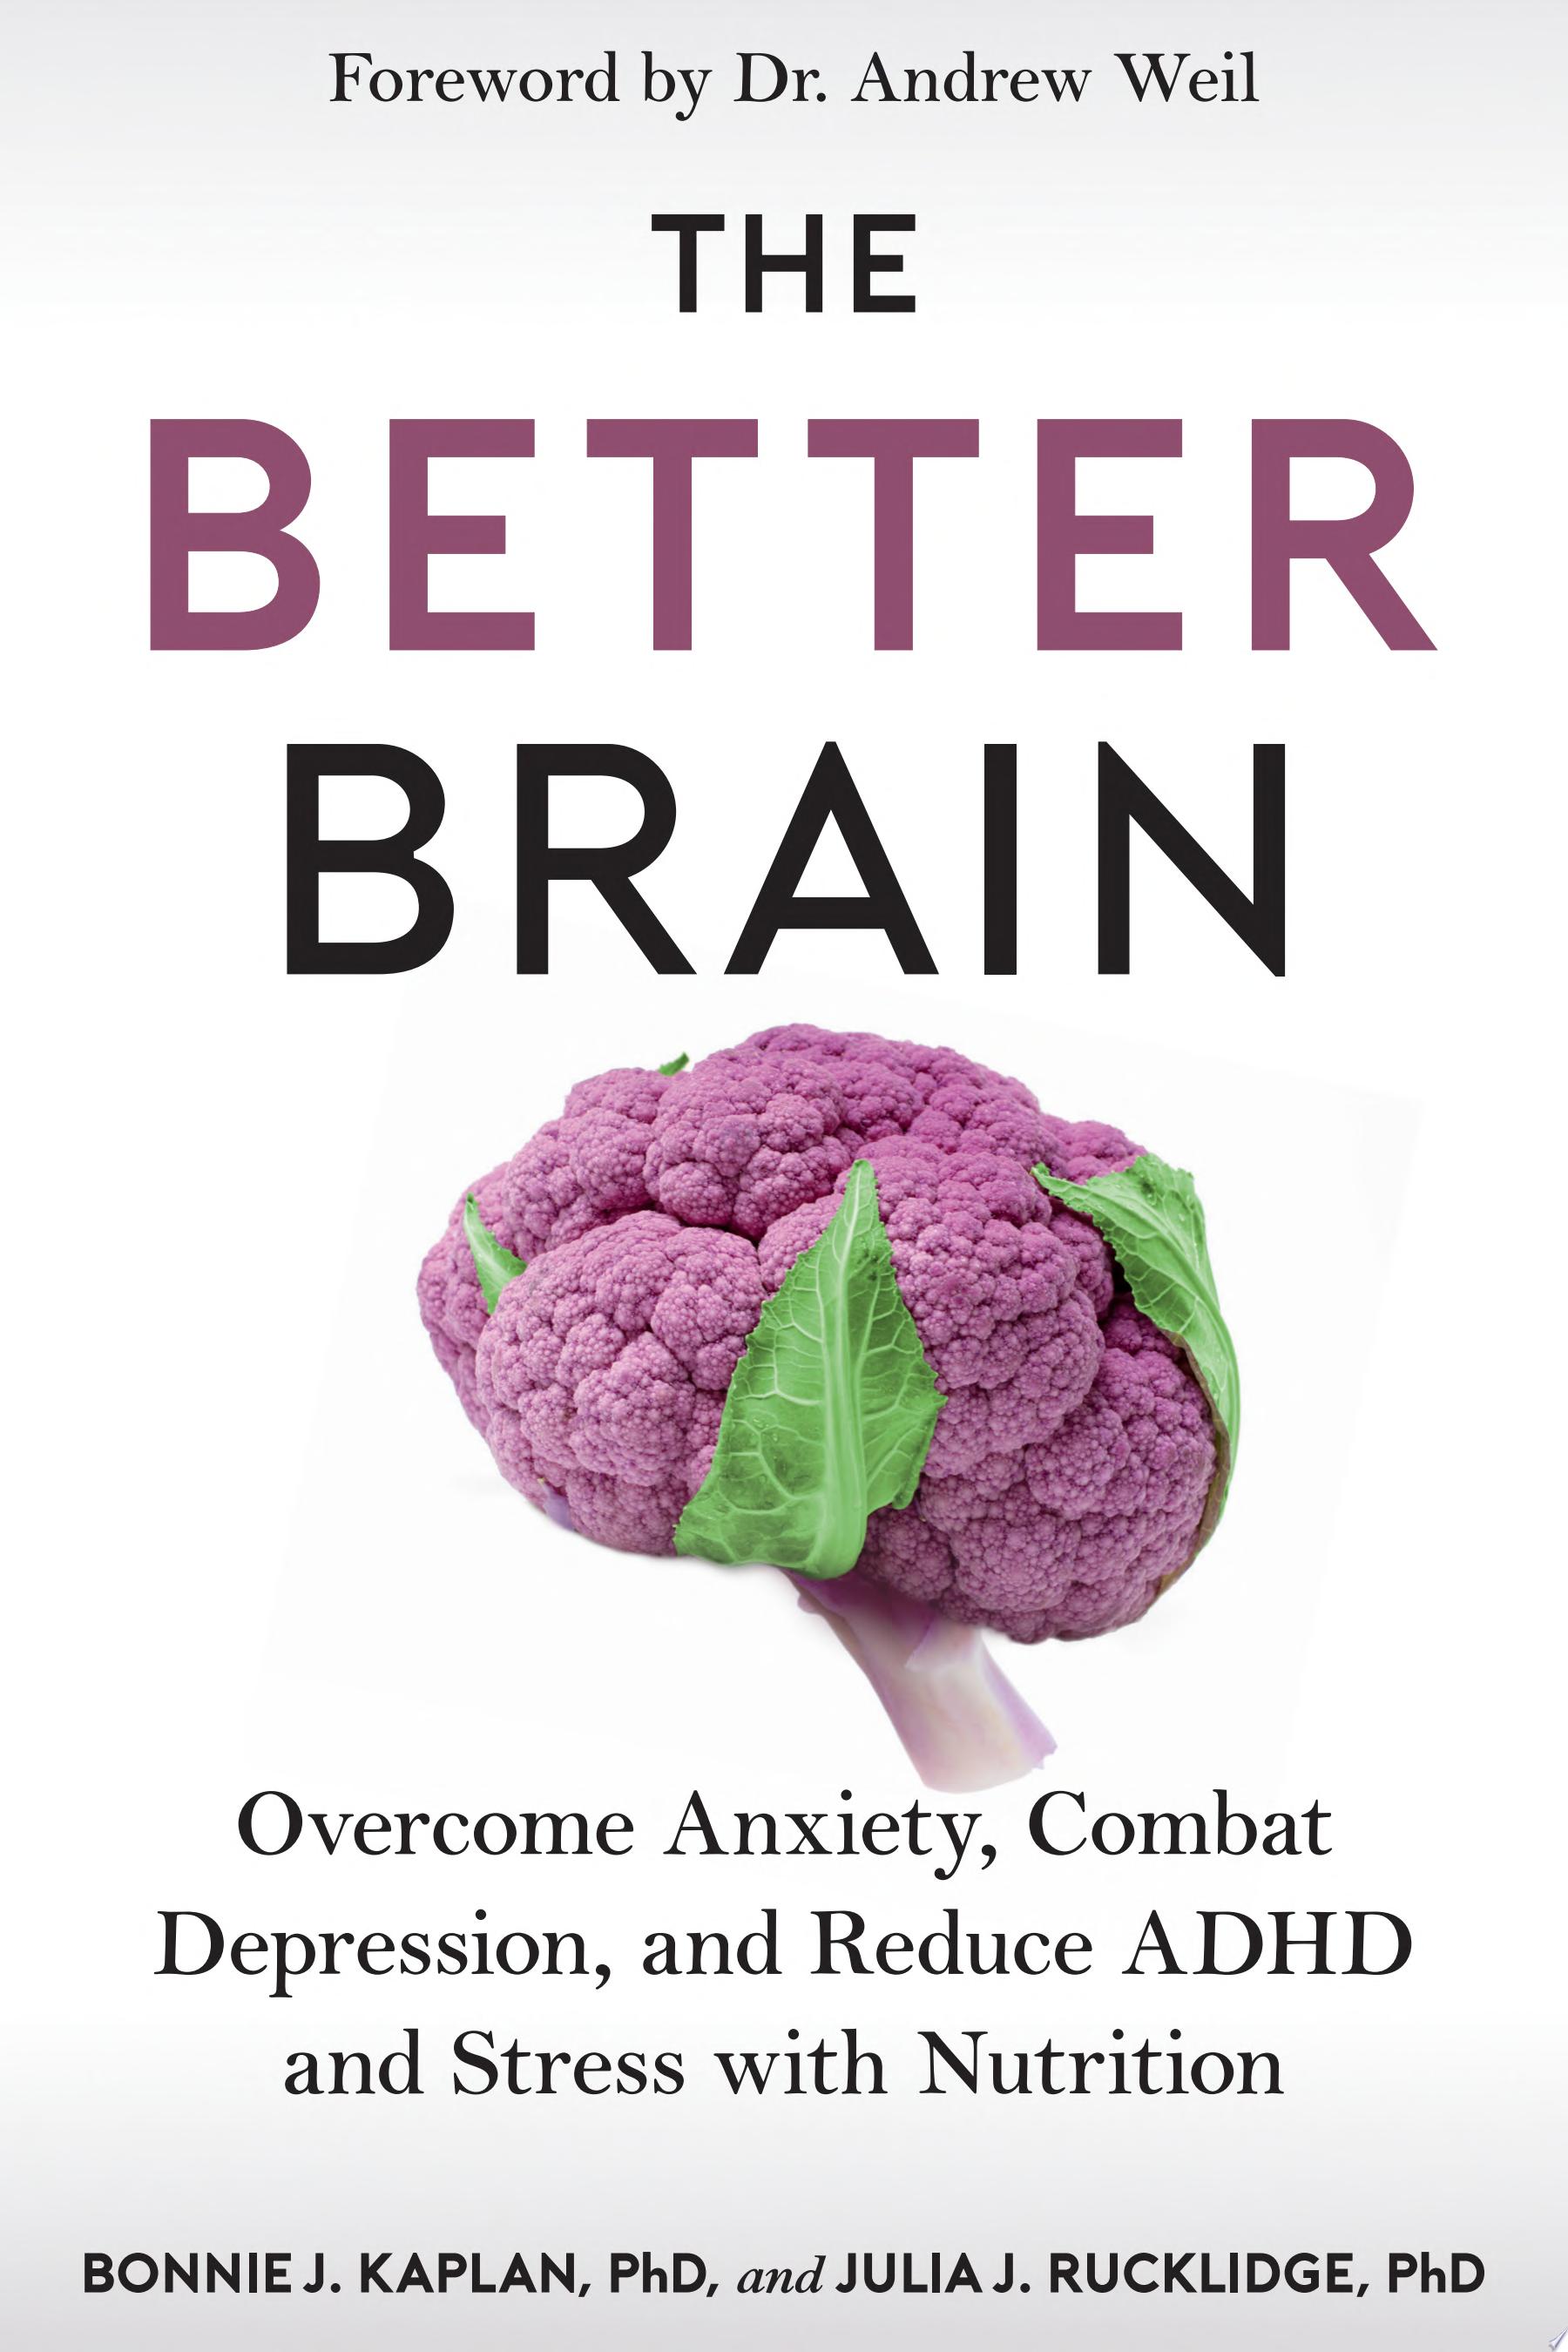 Image for "The Better Brain"